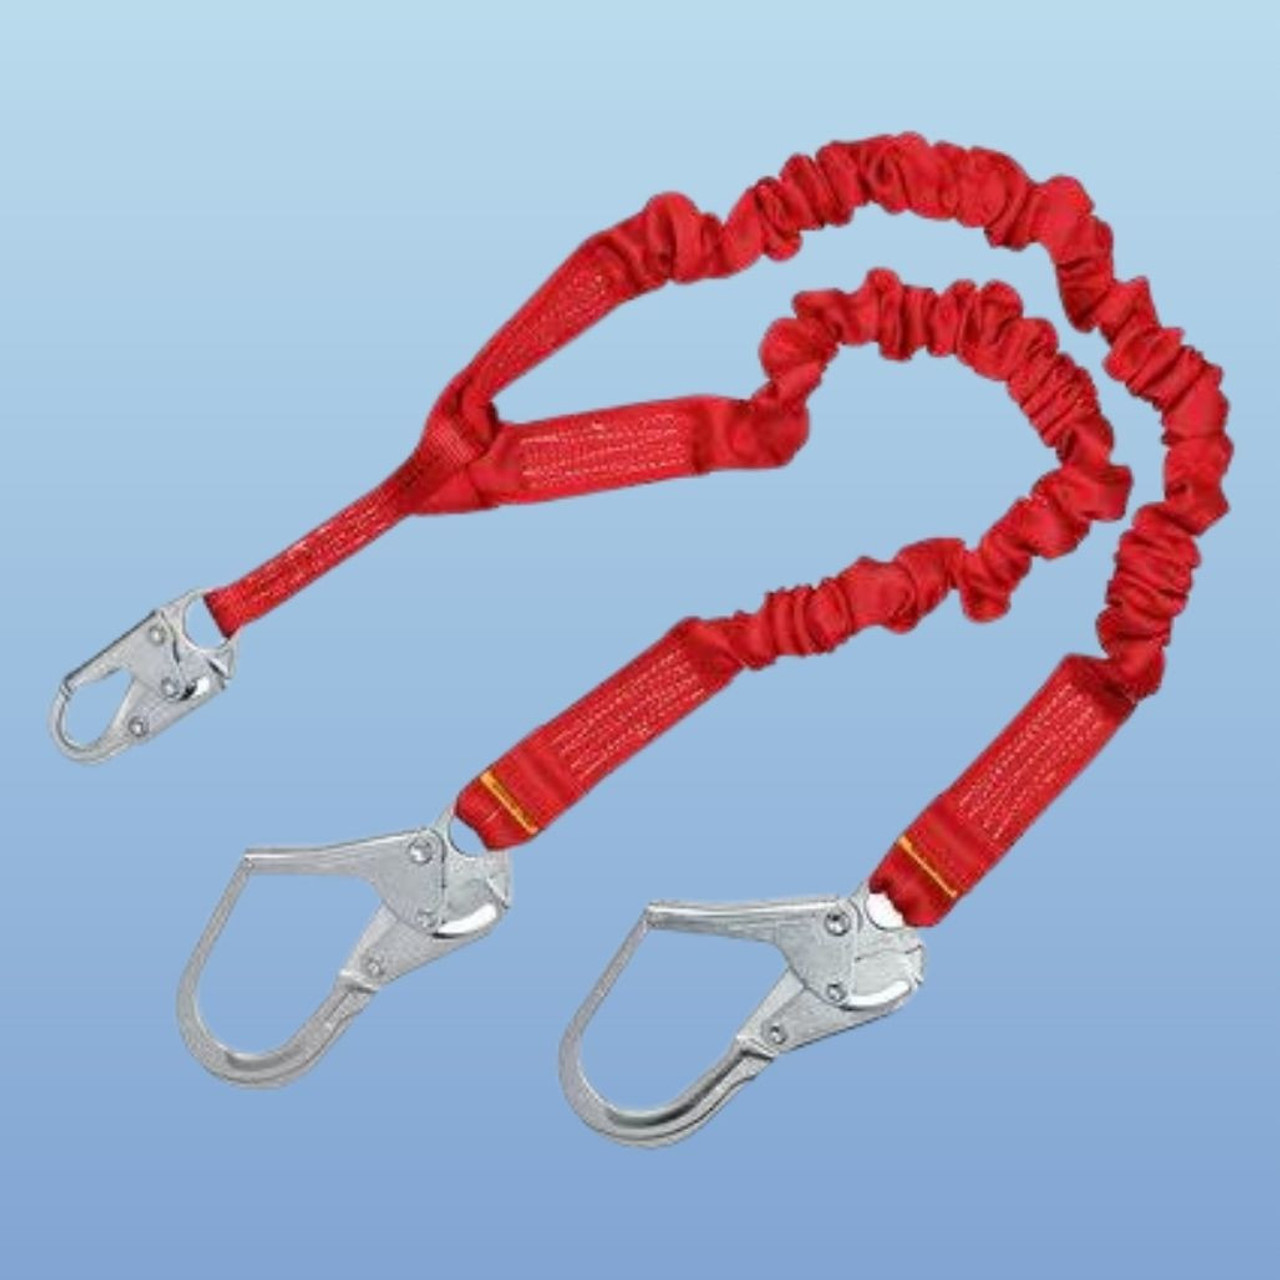 3/4in Flat Lanyard with Swivel Hook (Pack of 100) - Avon Security Products